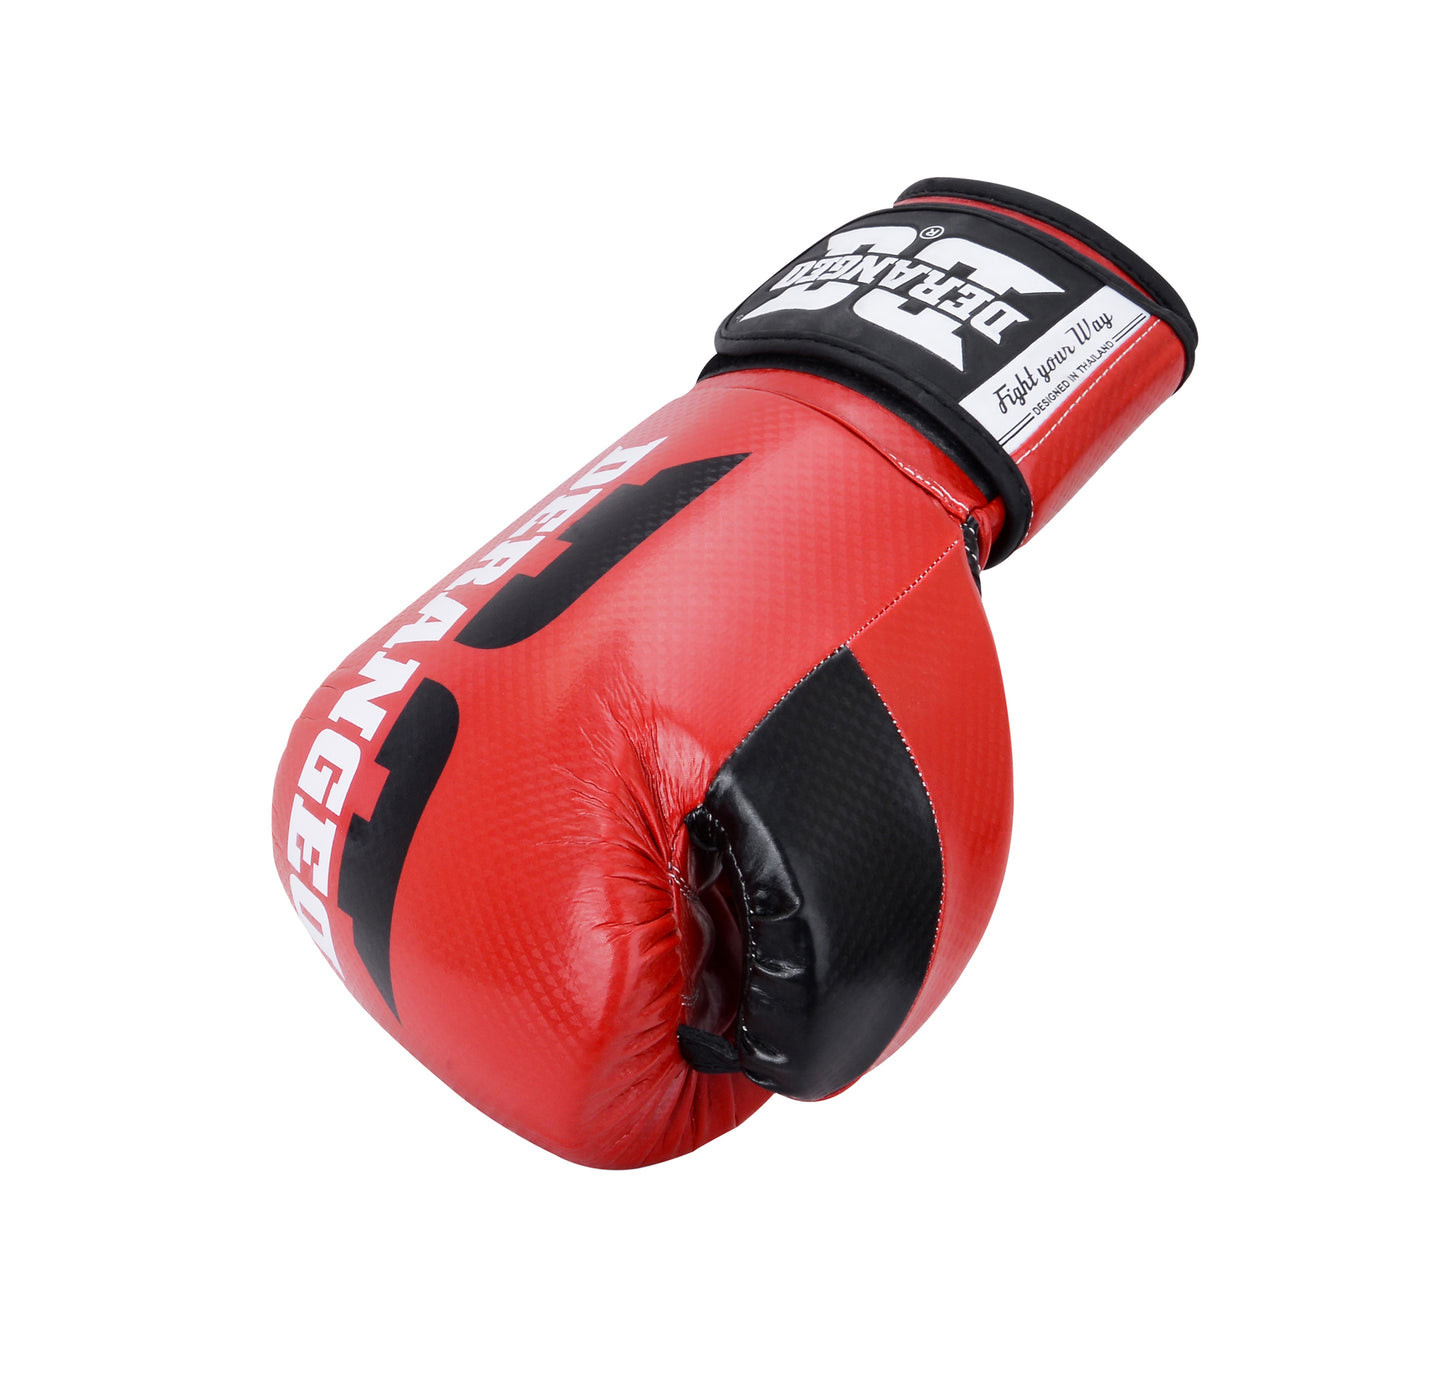 DERANGED Boxing Gloves Red Carbon